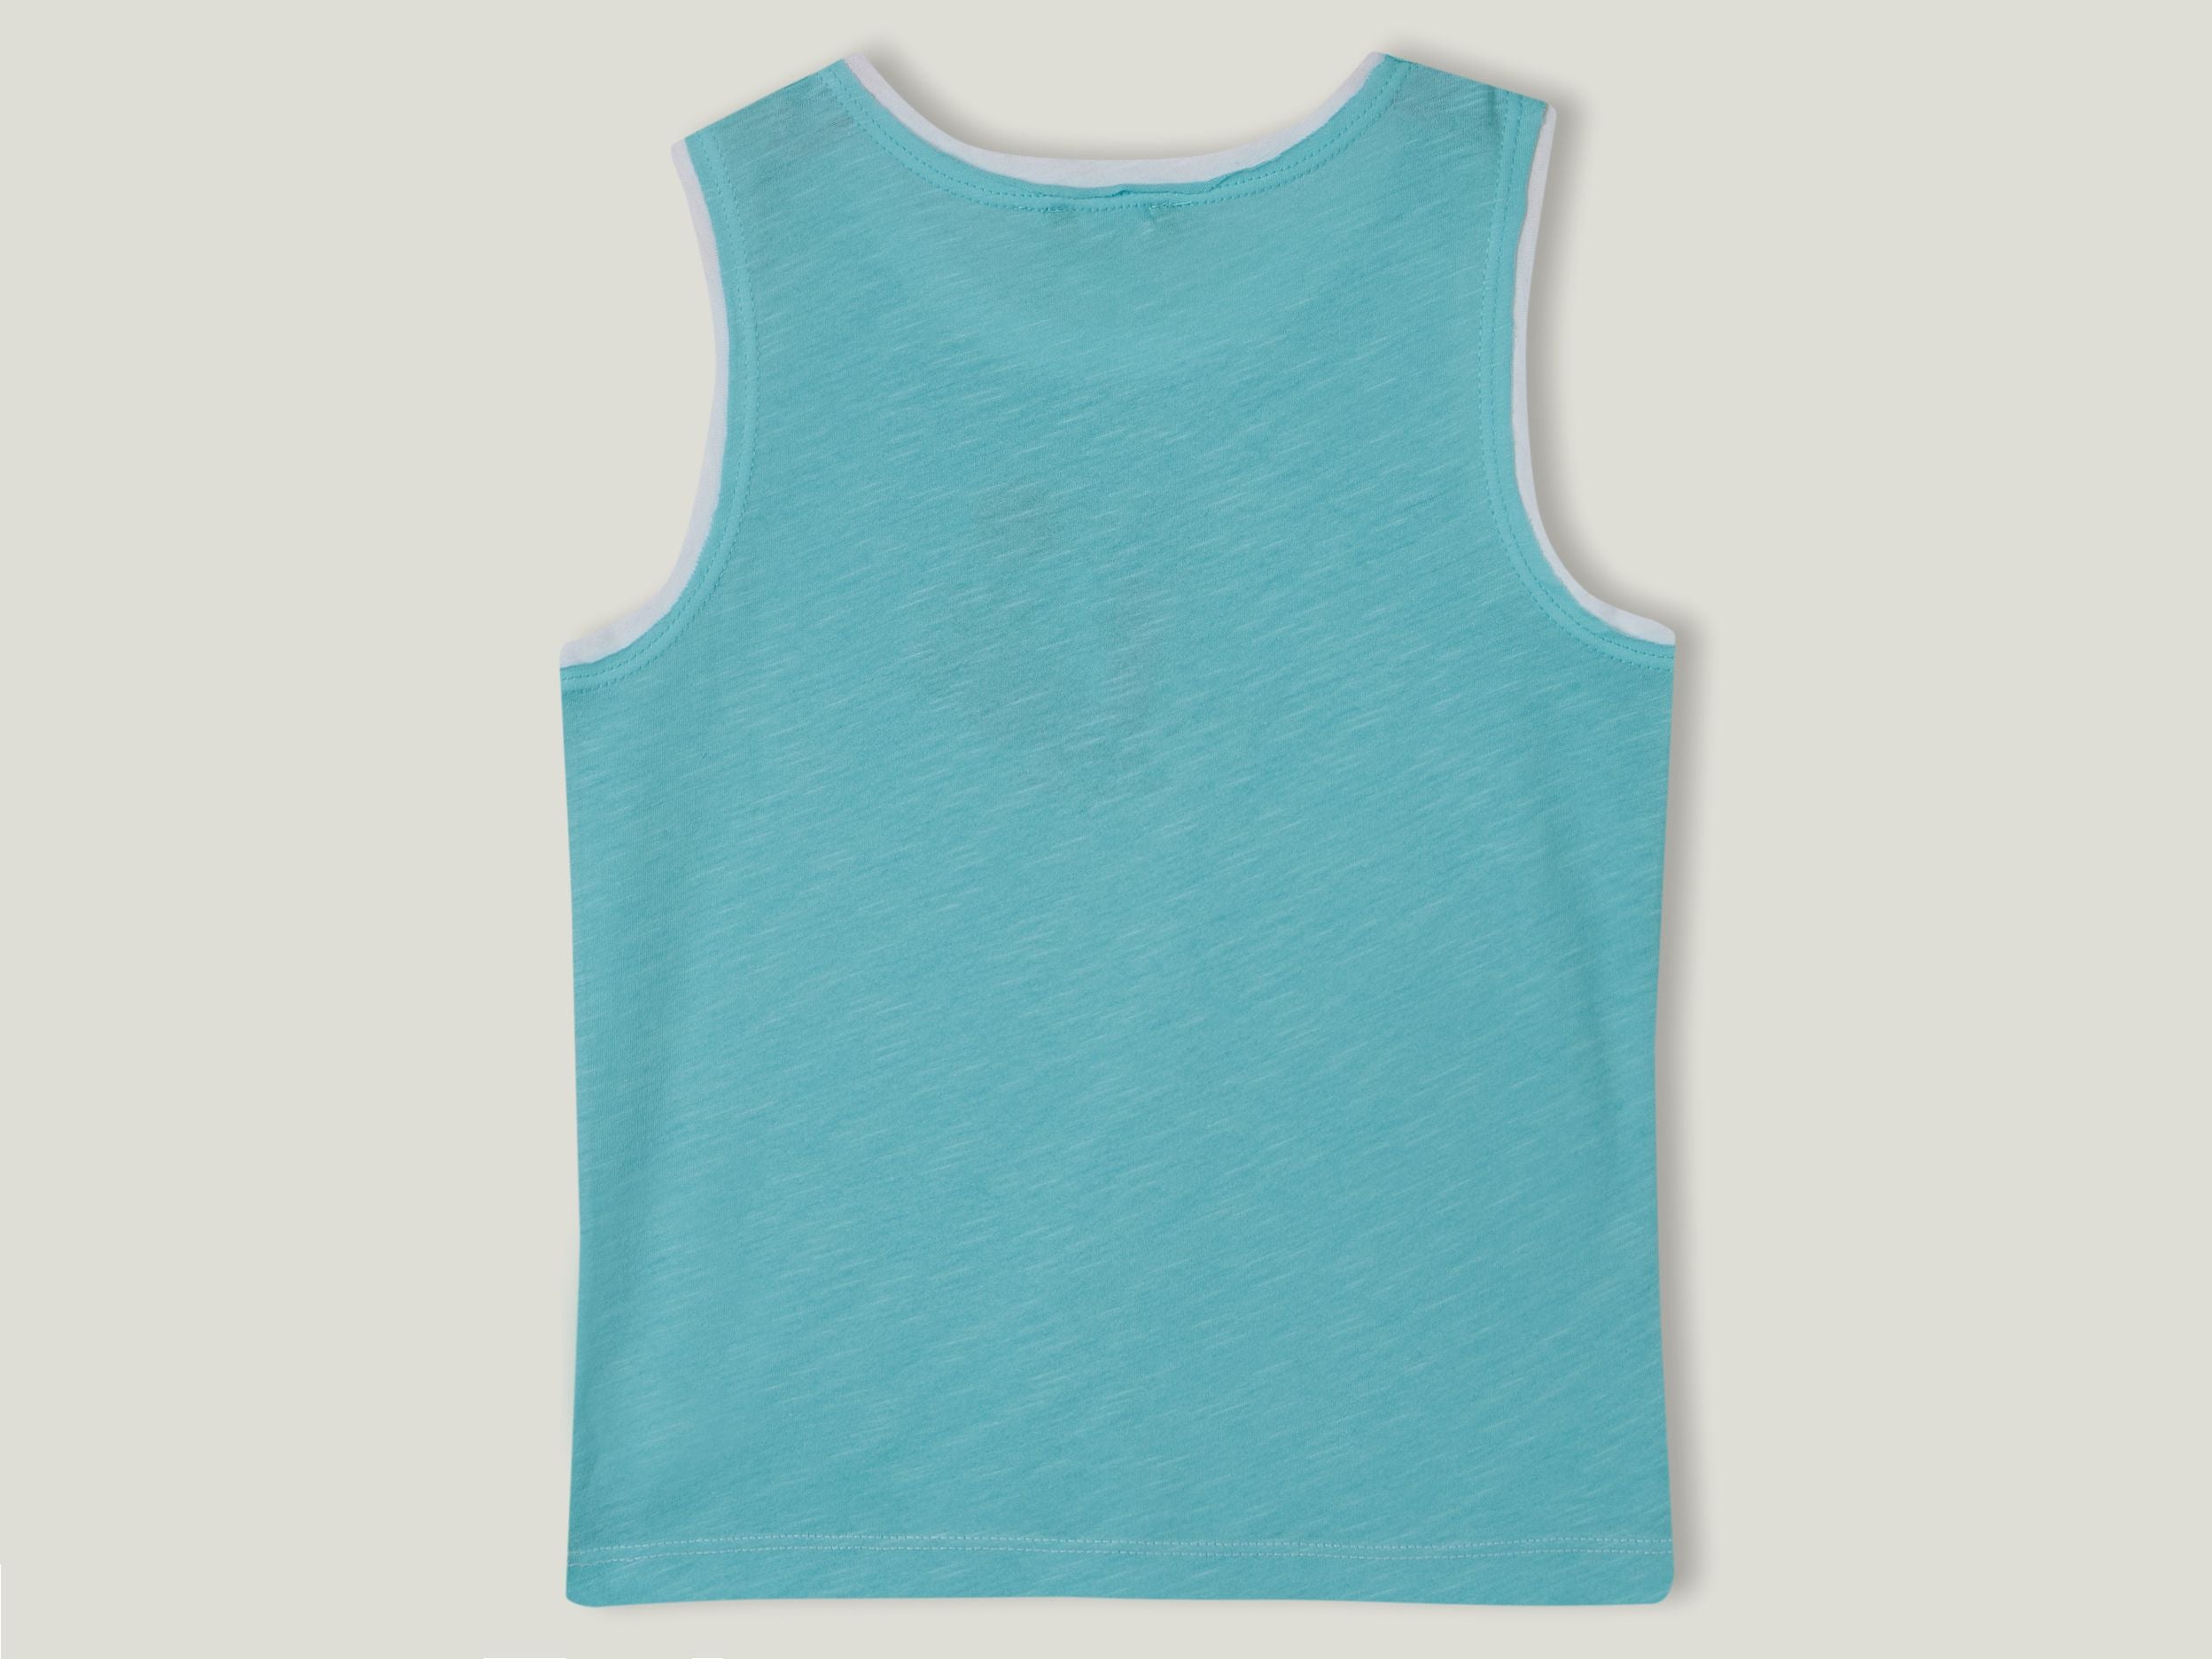 Lightweight tank top with print